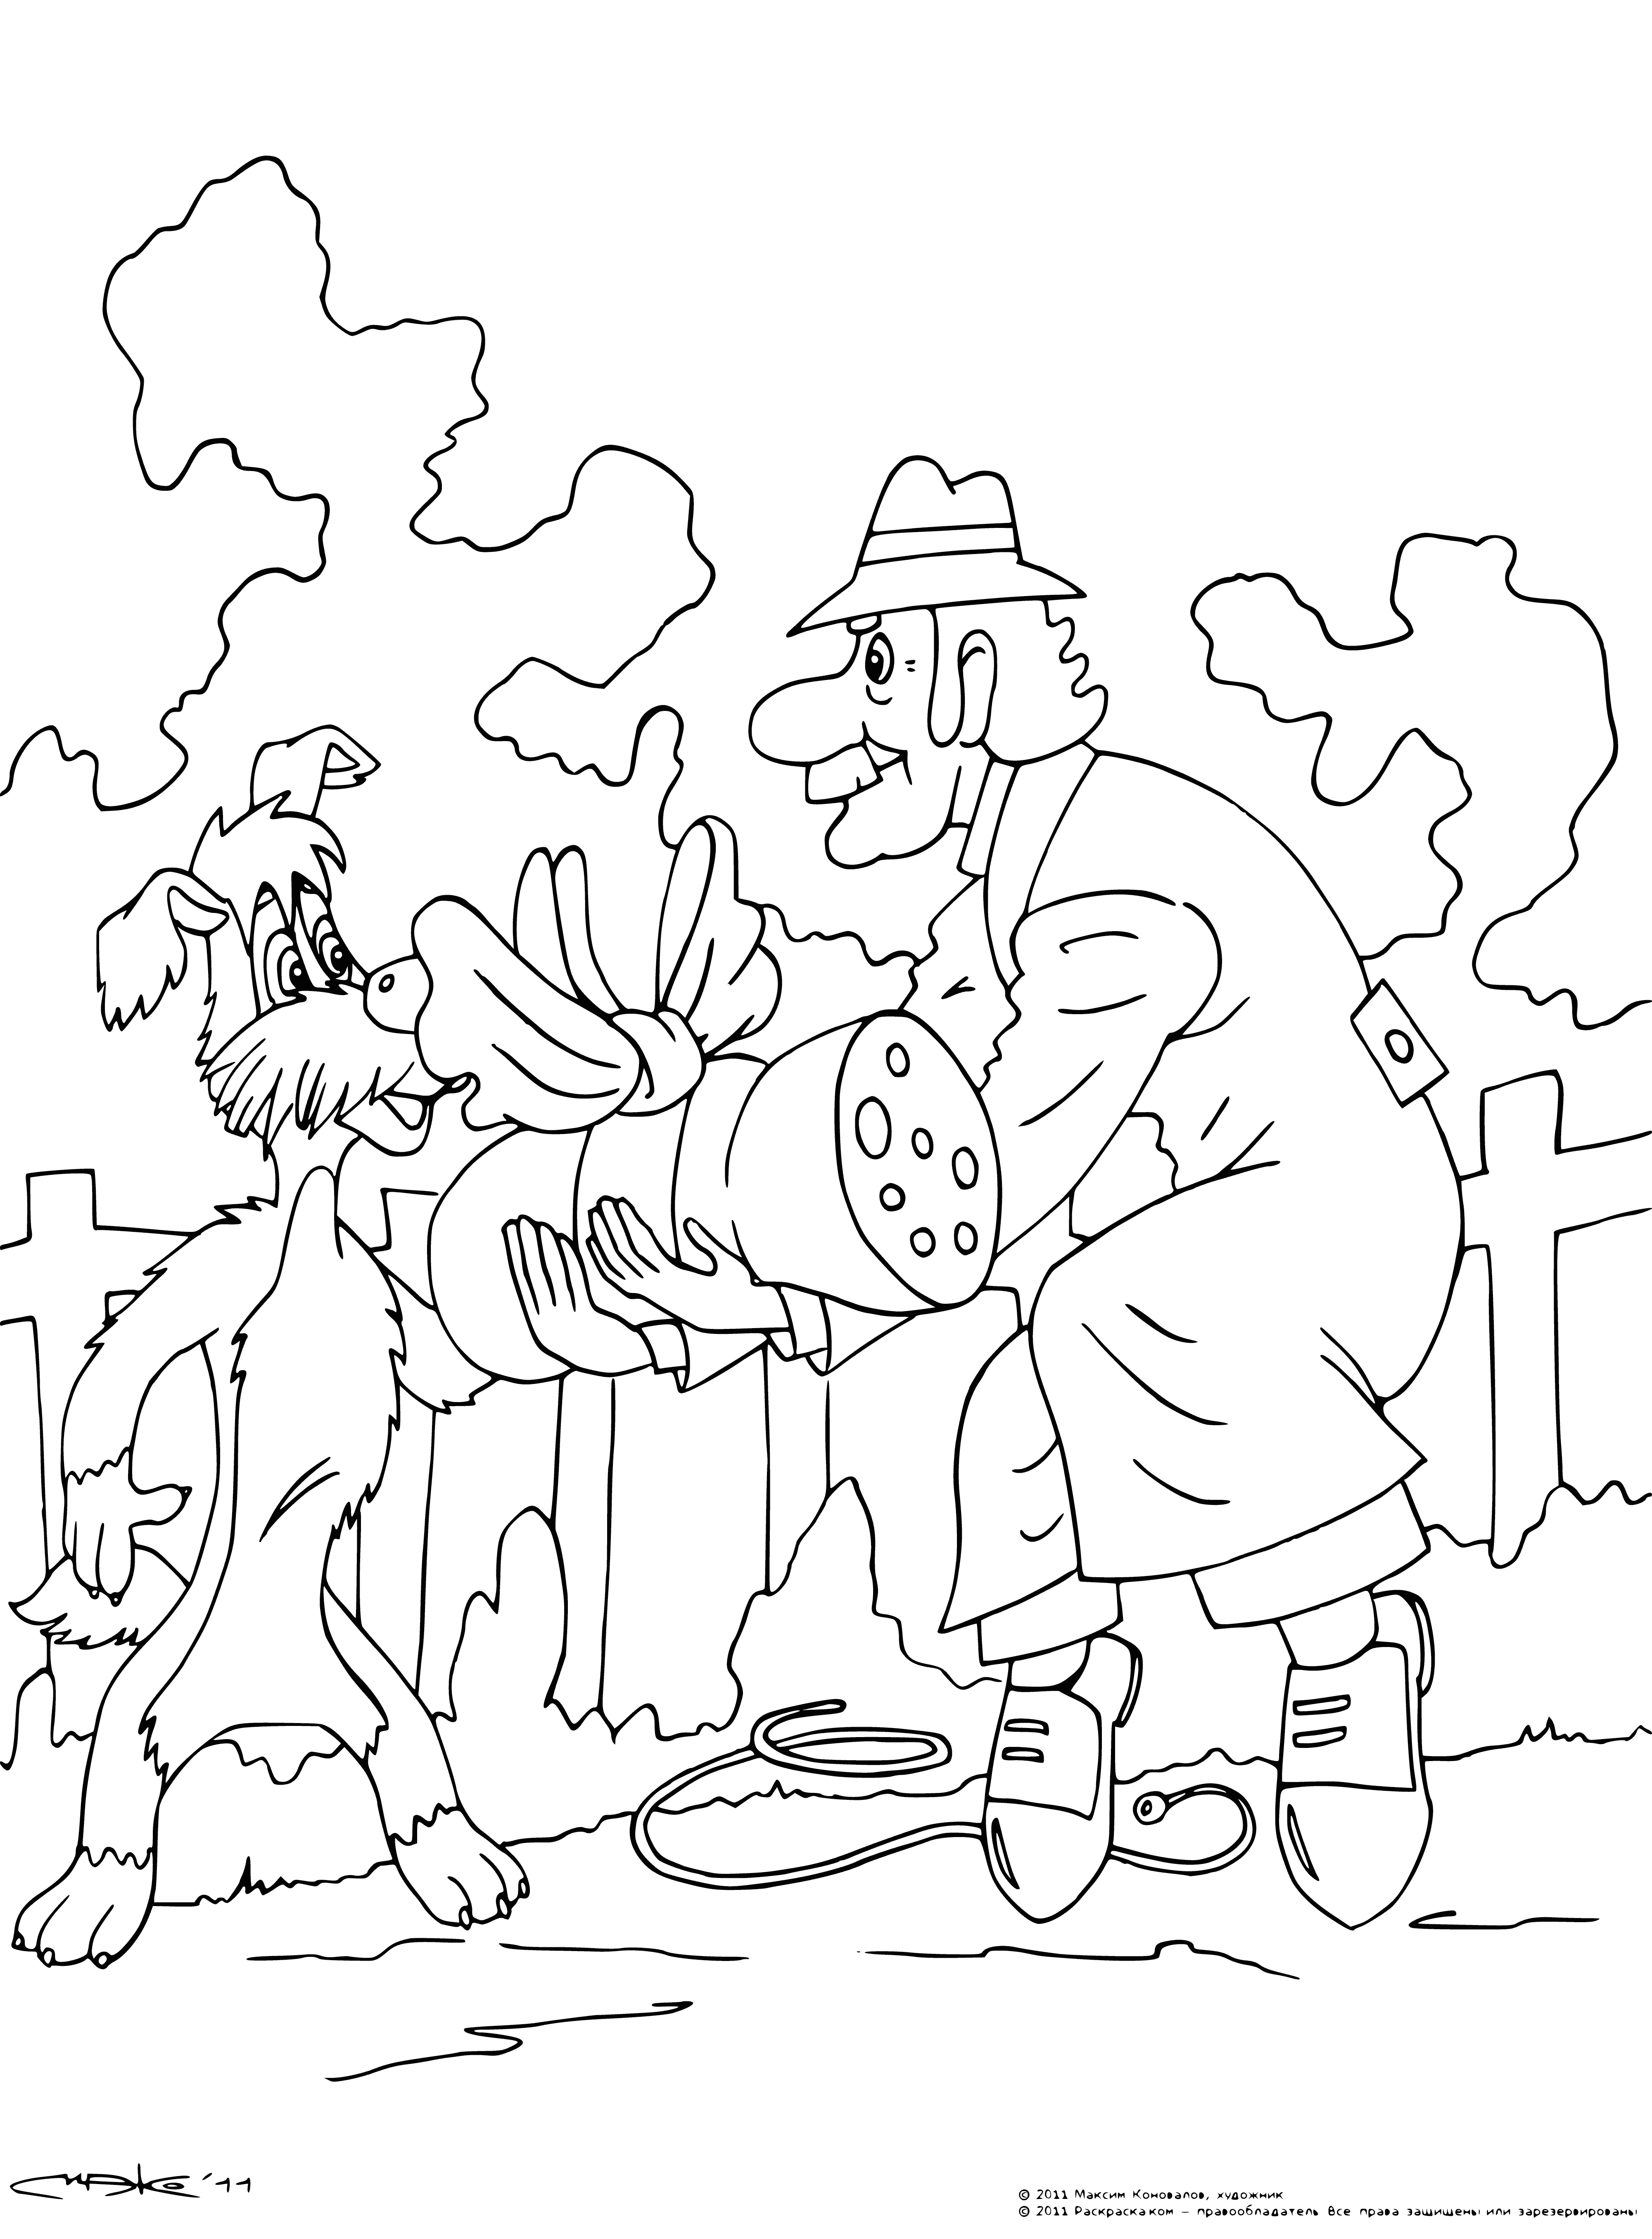 coloring page: Dog perched atop large sausage, content and happy. Suggestion that sausage is part of larger meal, surrounding area not revealed.